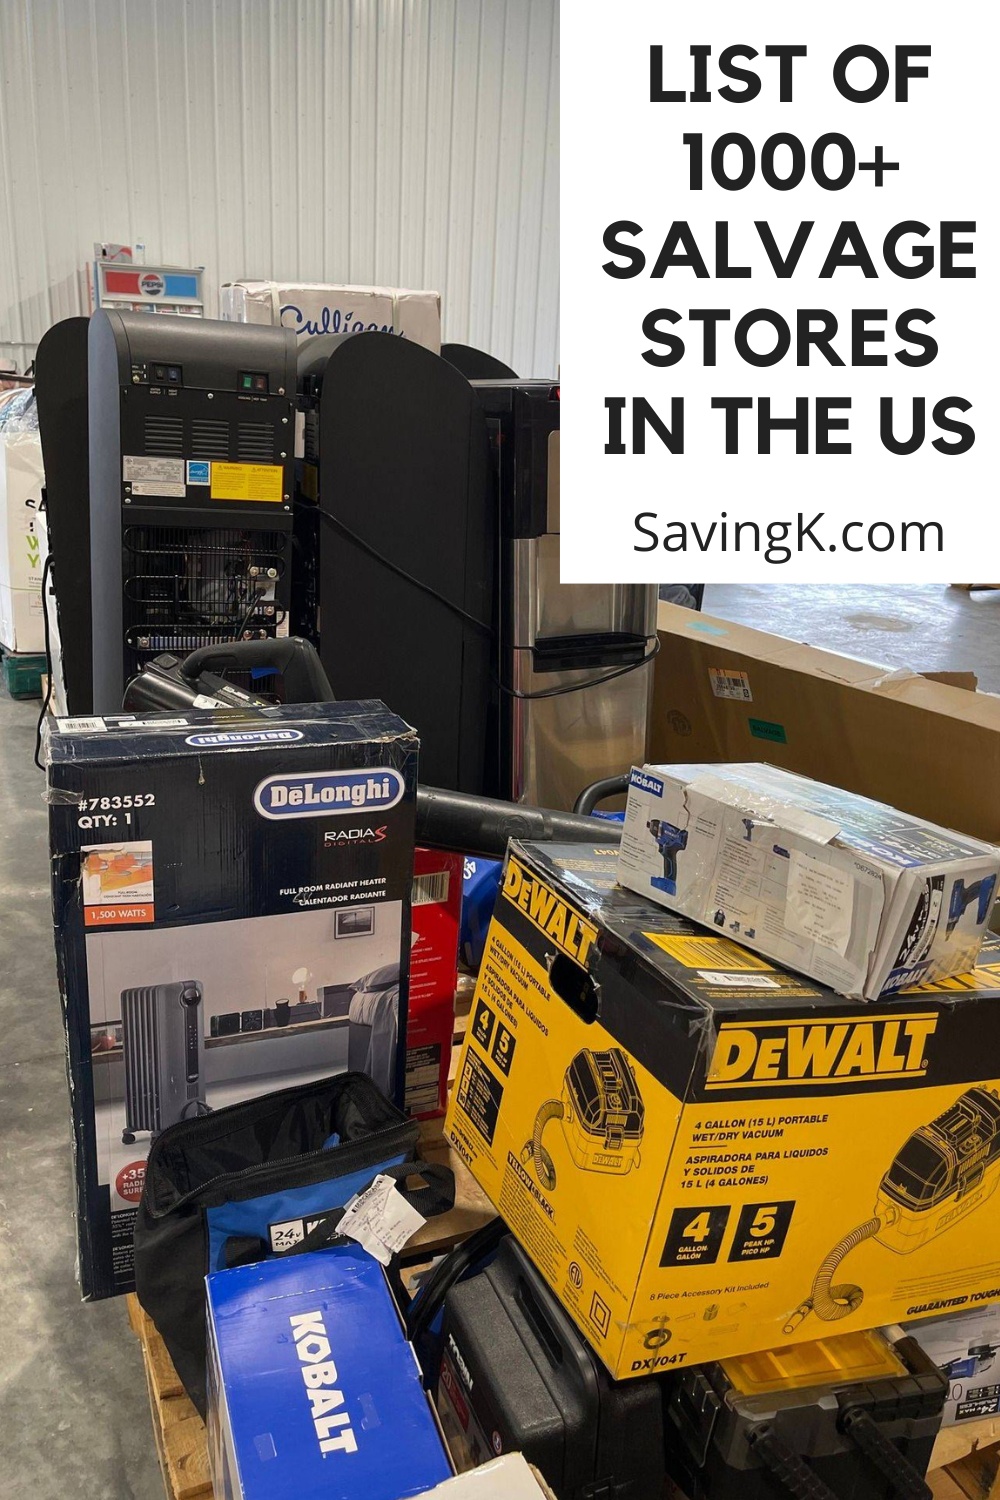 List of 1000+ Salvage Stores In The US